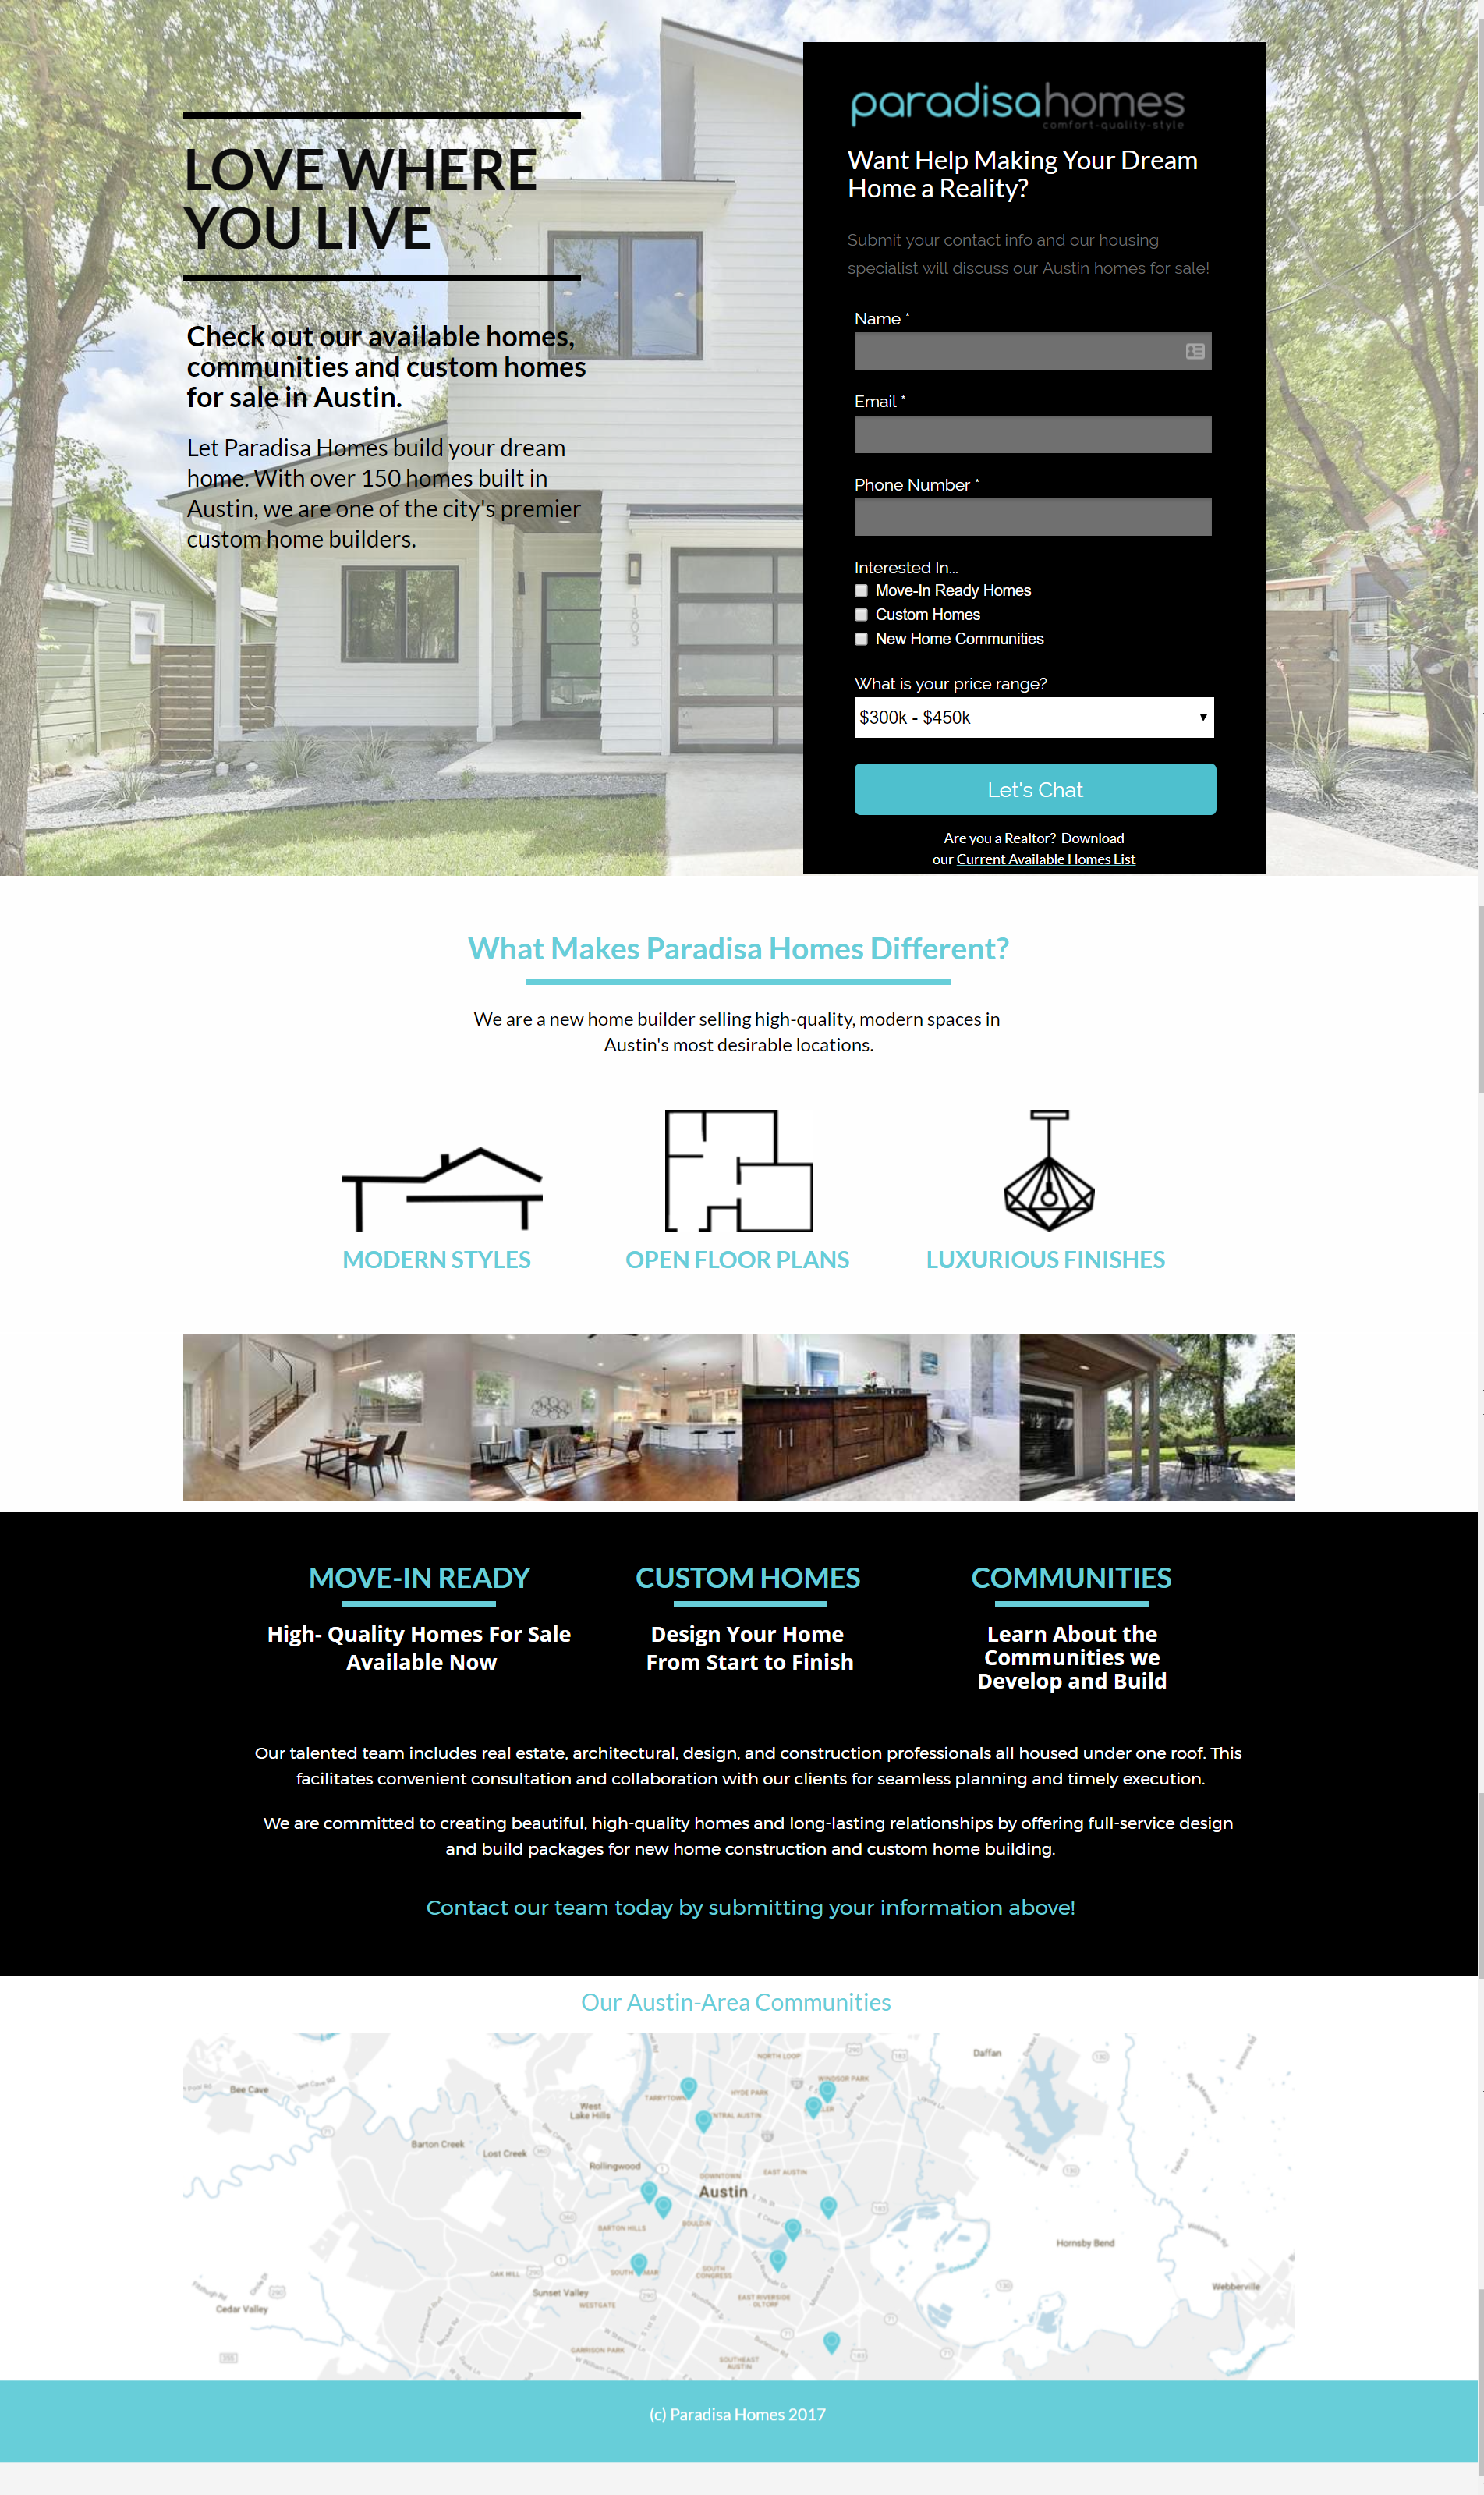 Paradisa homes landing page from Neon Ambition